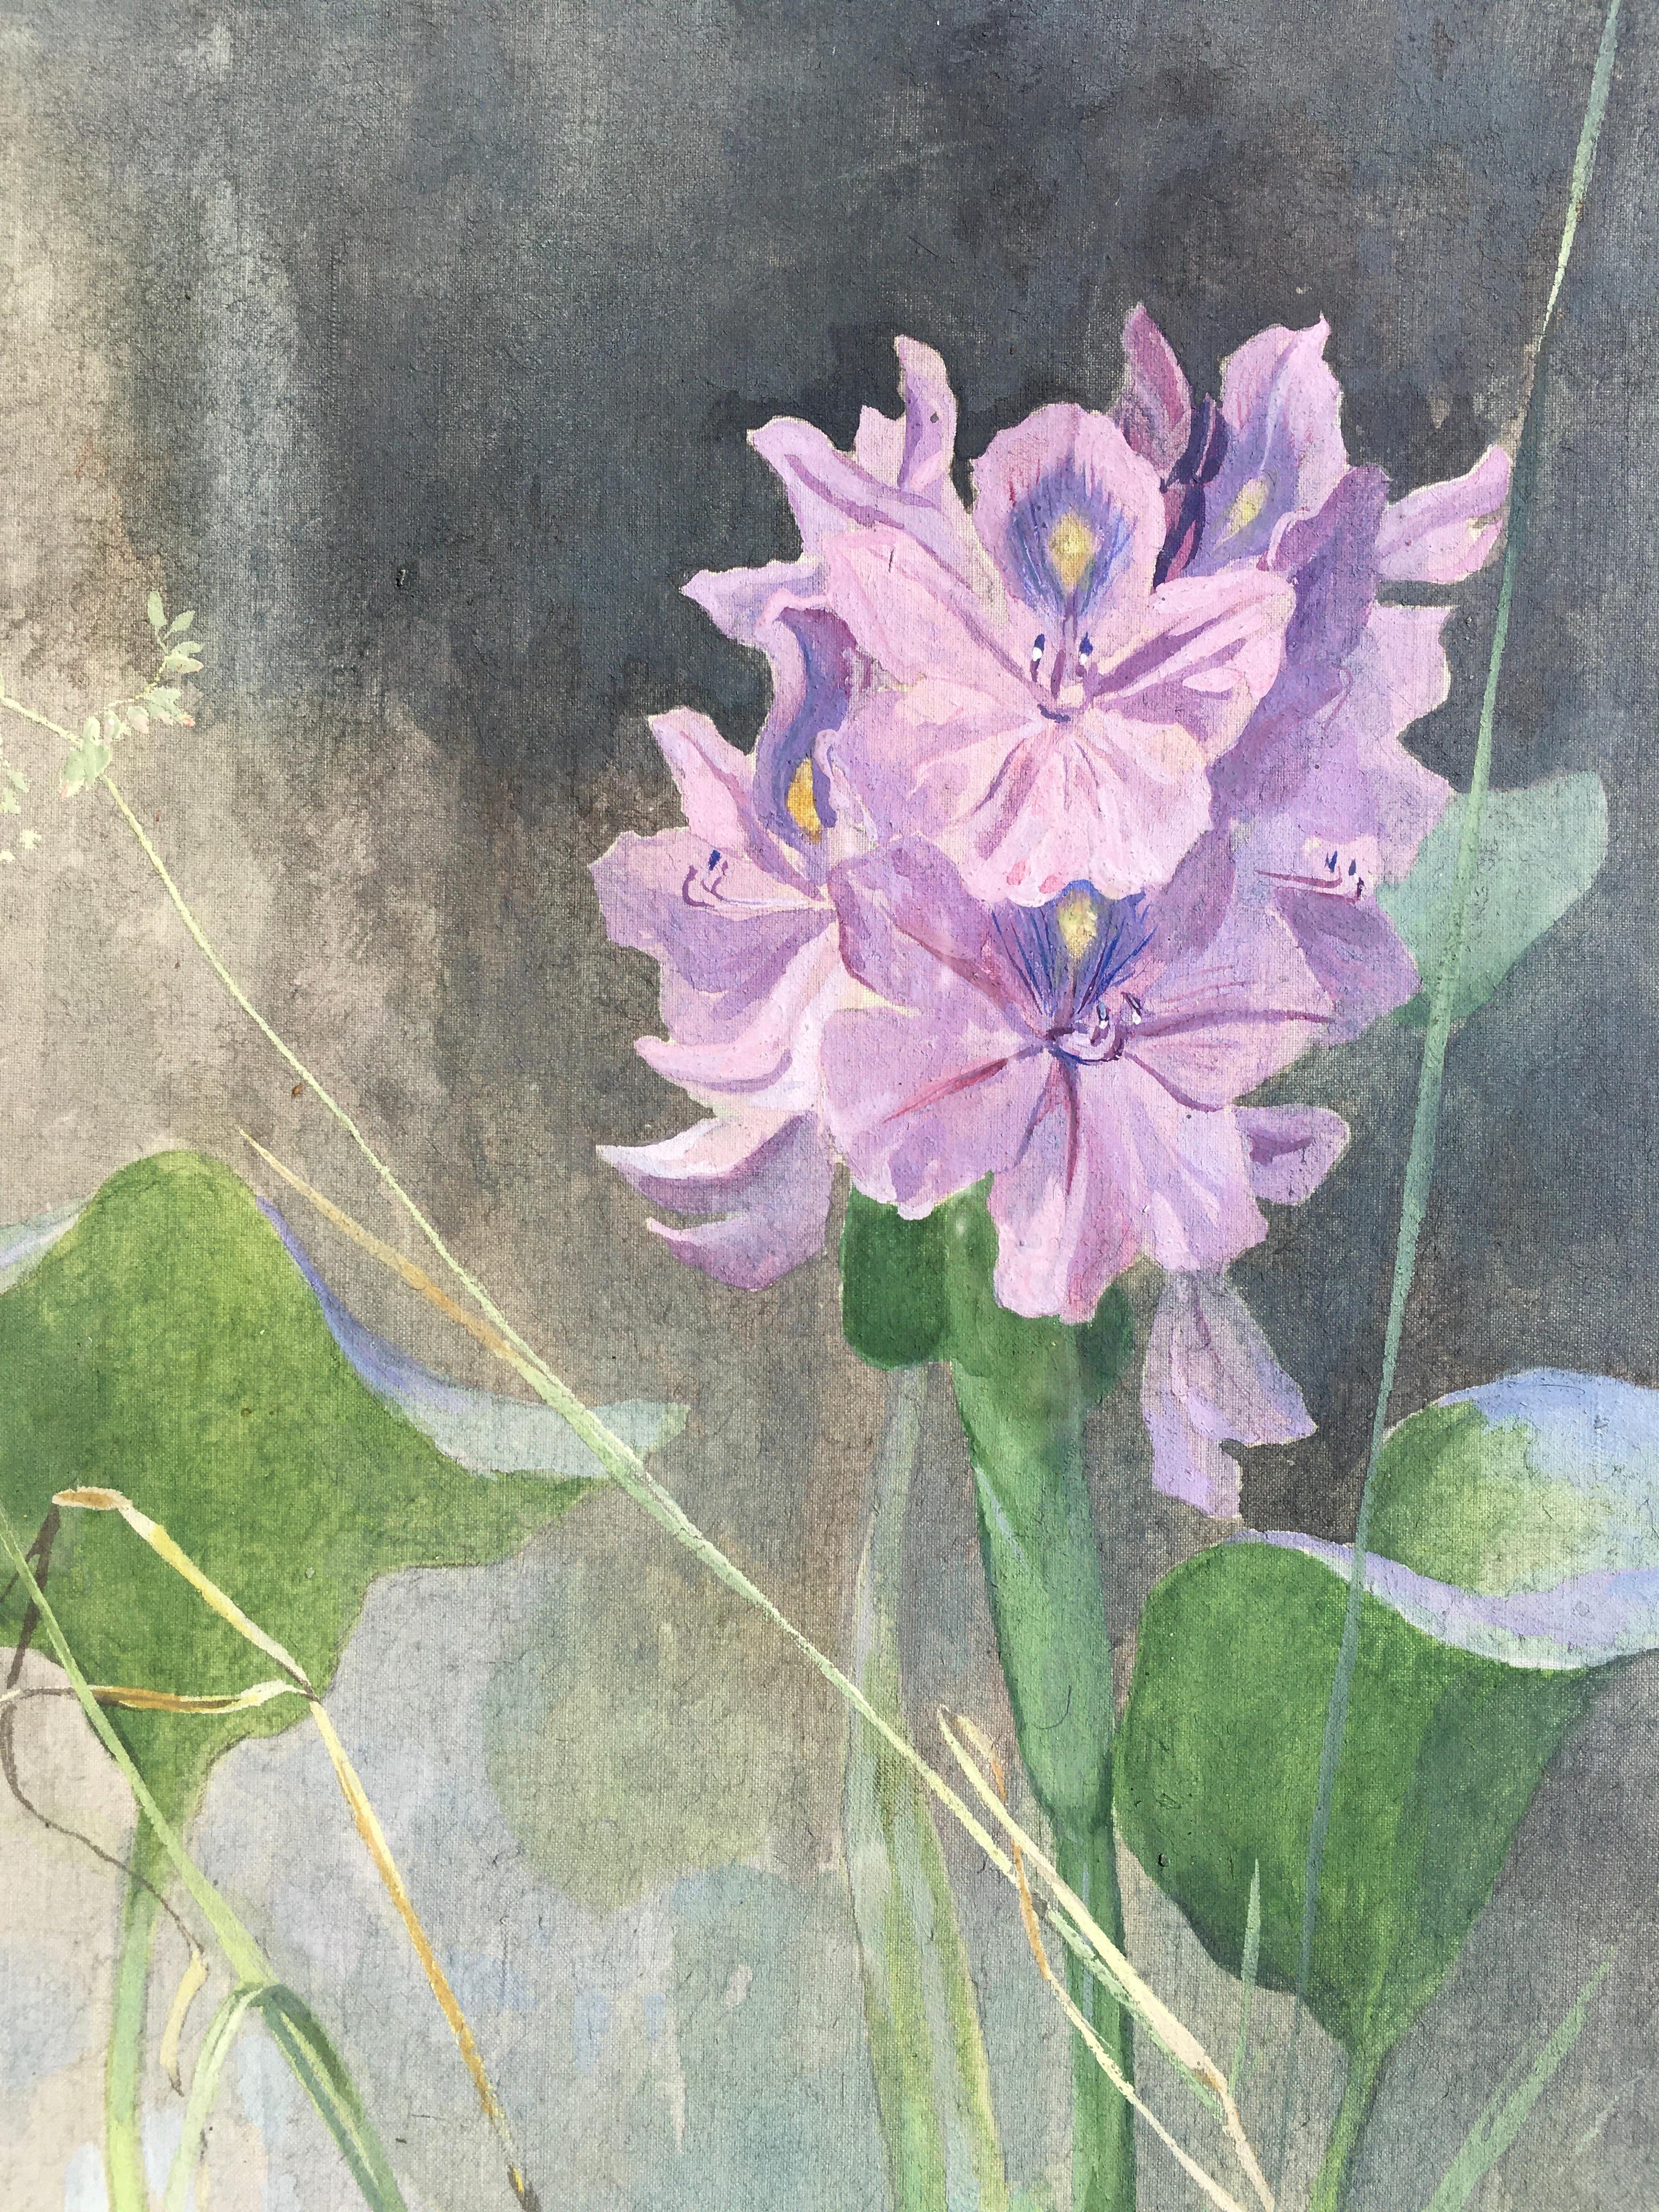 ARTHUR WARDLE
(1864-1949)

Study of a Water Hyacinth

Signed
Watercolour and bodycolour on linen, framed

33.5 by 23 cm., 13 ½ by 9 in.
(frame size 52.5 by 43 cm., 21 ¾ by 17 in.)

Arthur Wardle was born in London.  He first exhibited at the Royal